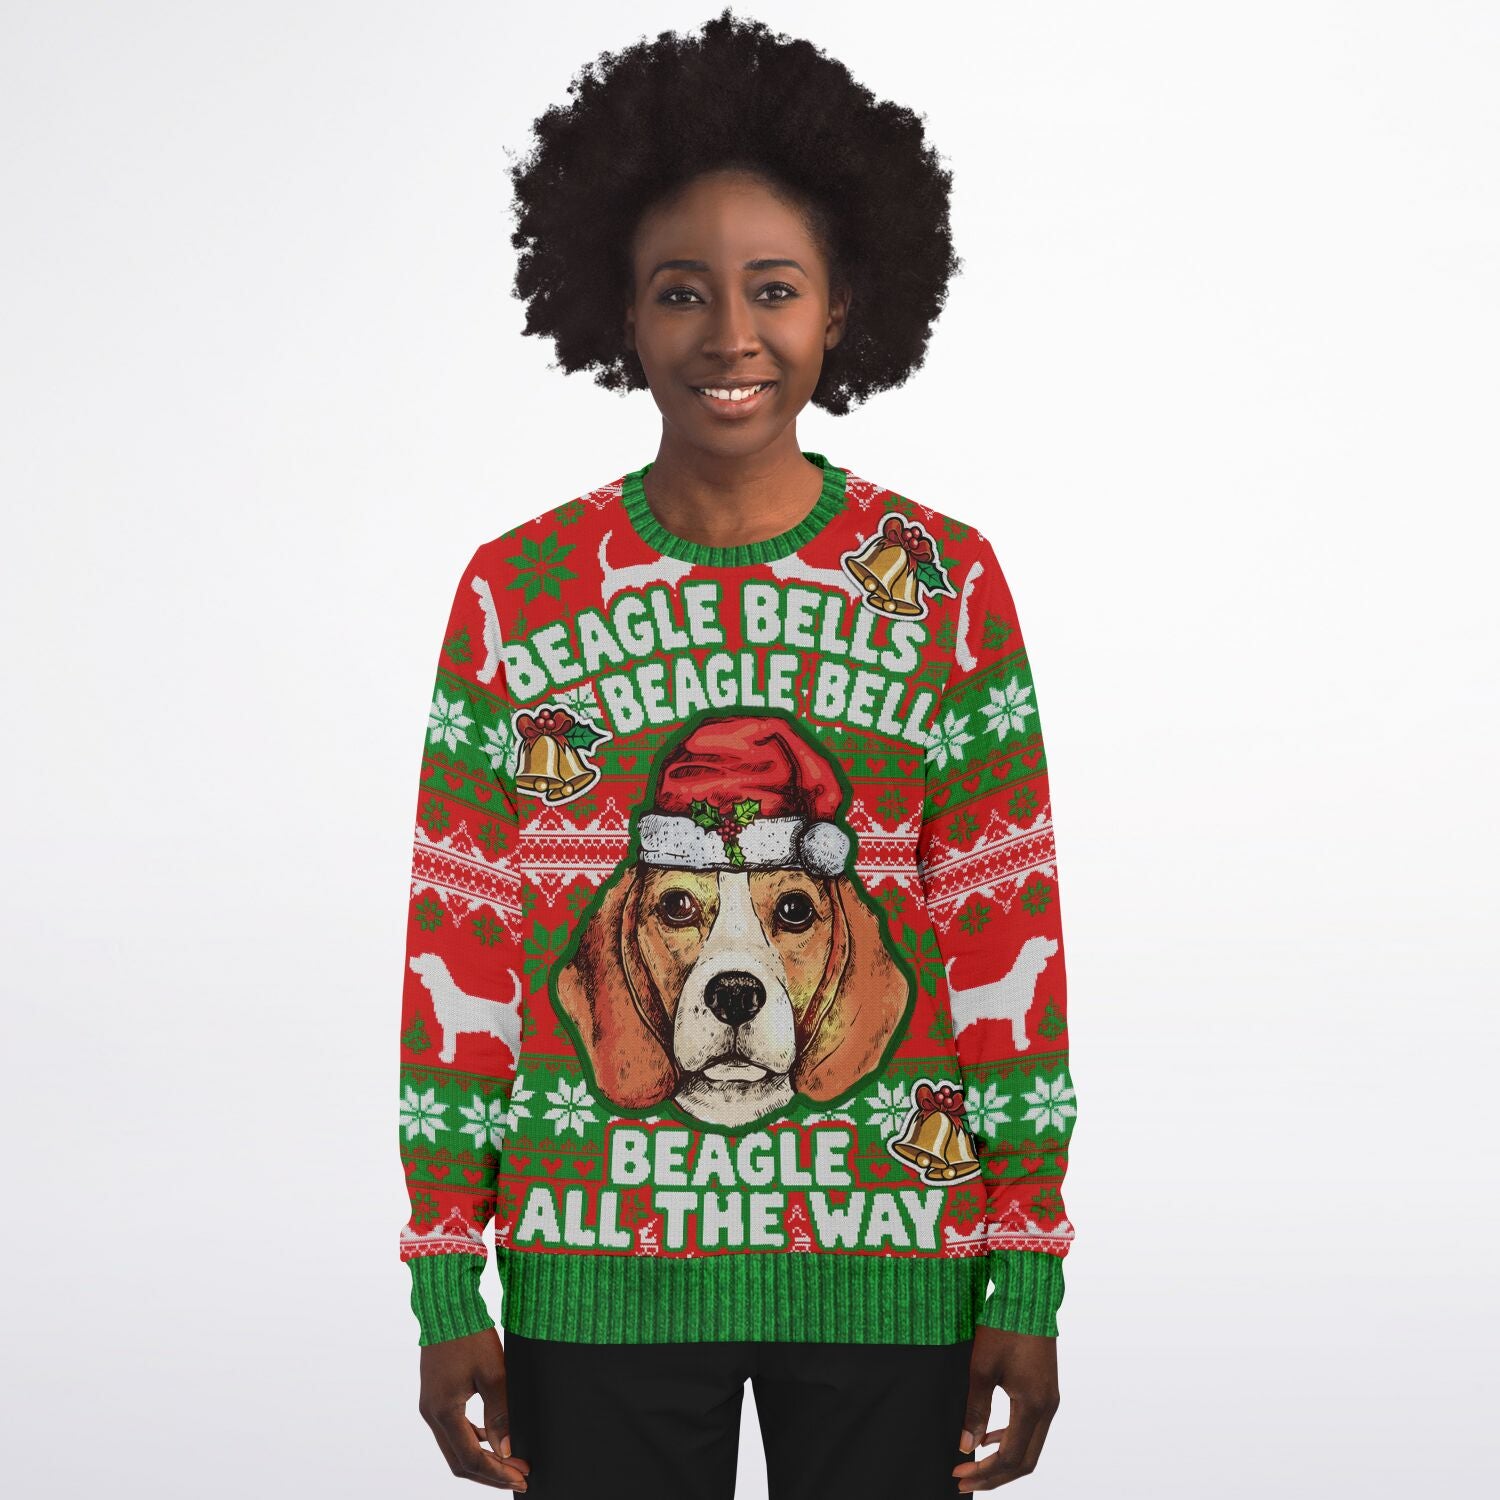 Beagle Bells Ugly Sweater - Sport Finesse